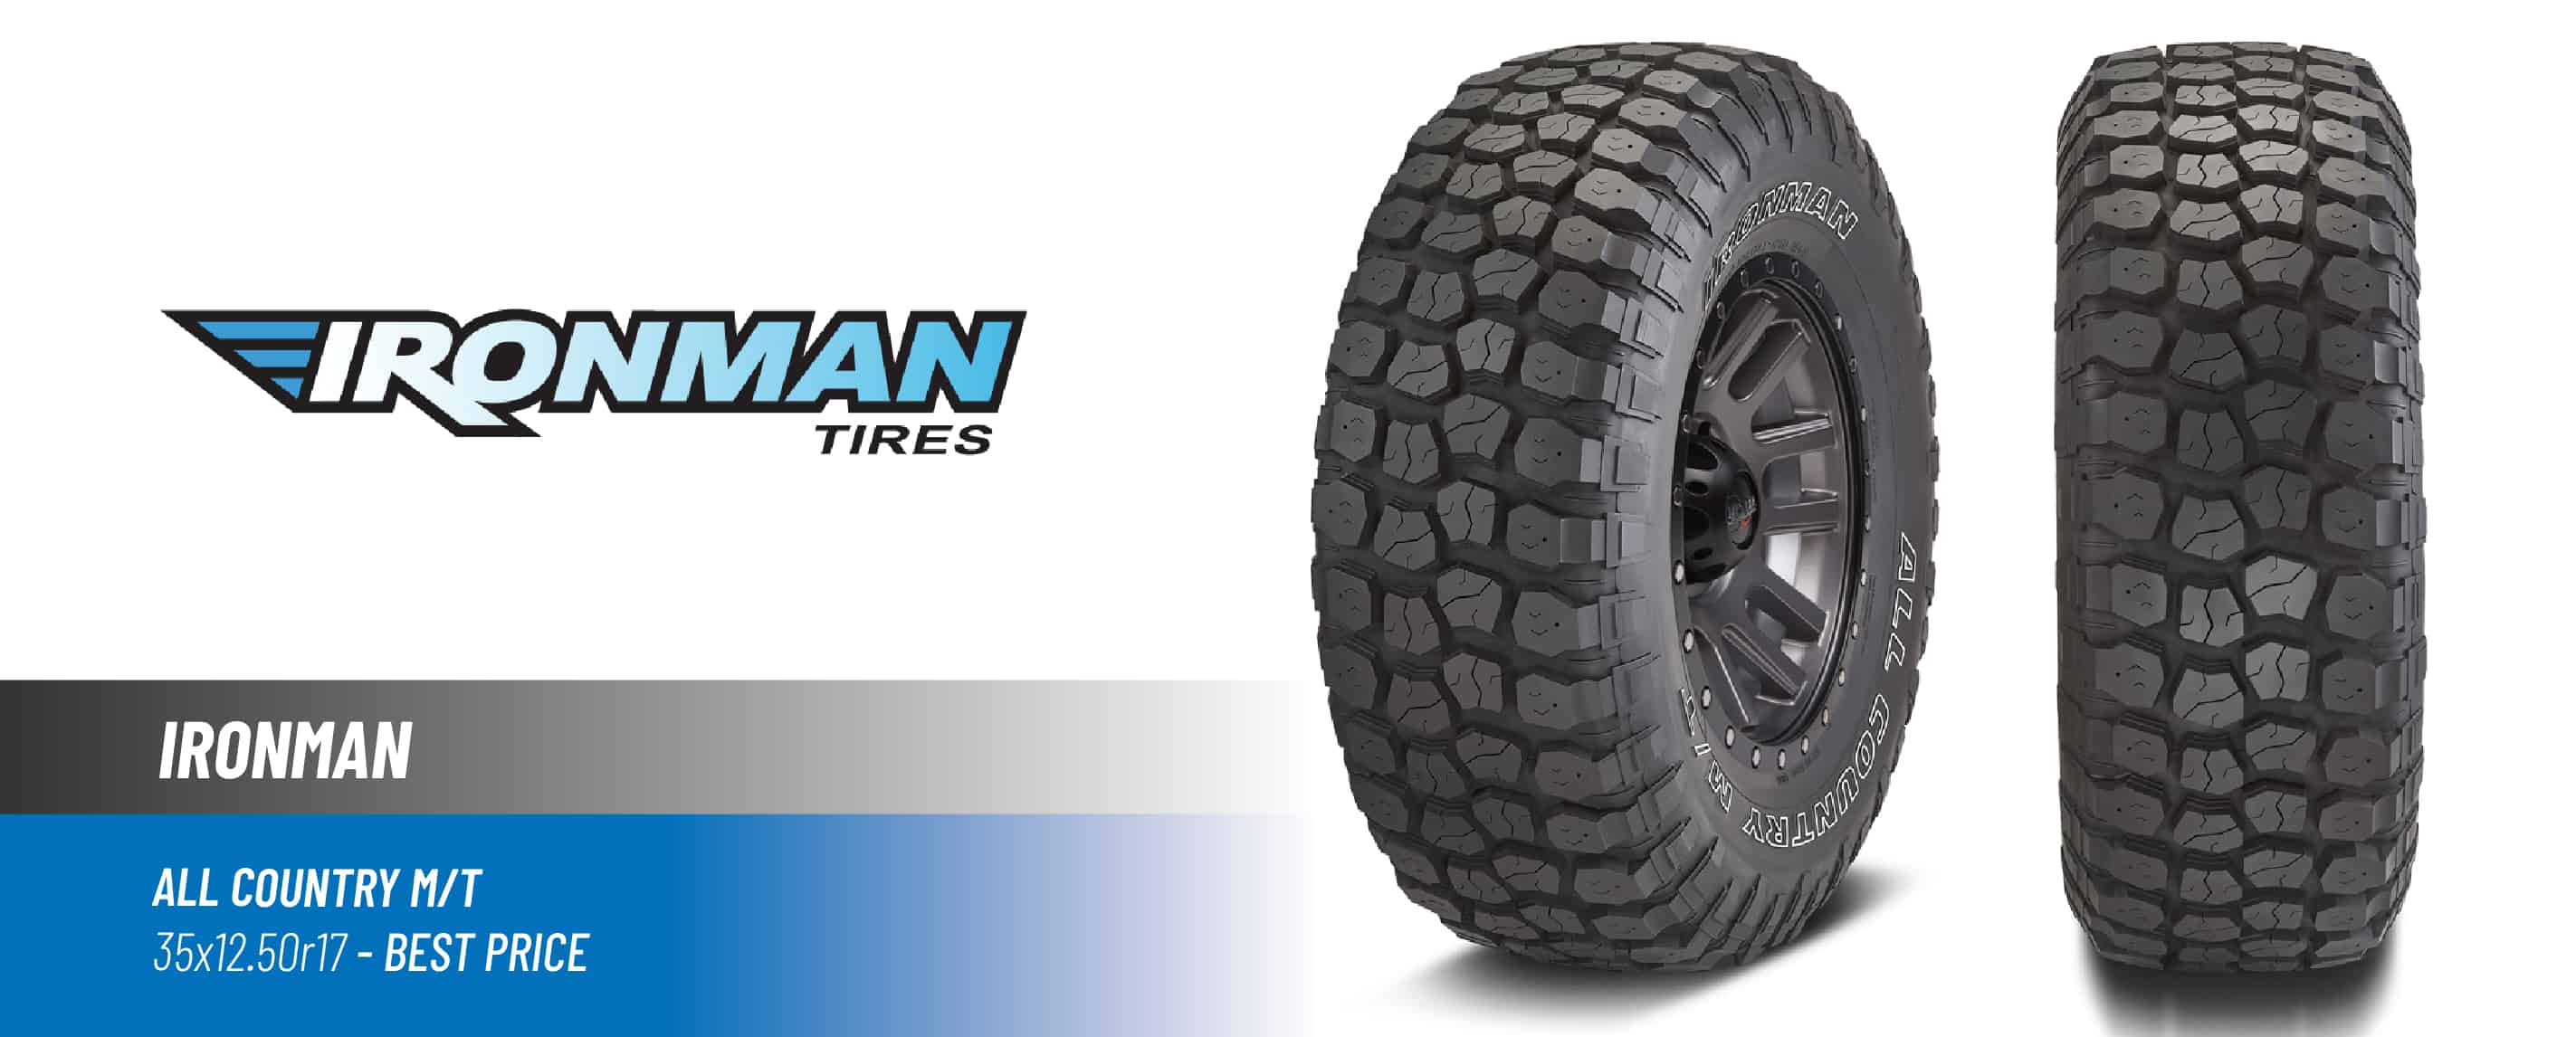 Top#1 Best Price: Ironman All Country M/T – best 35x12.50 r17